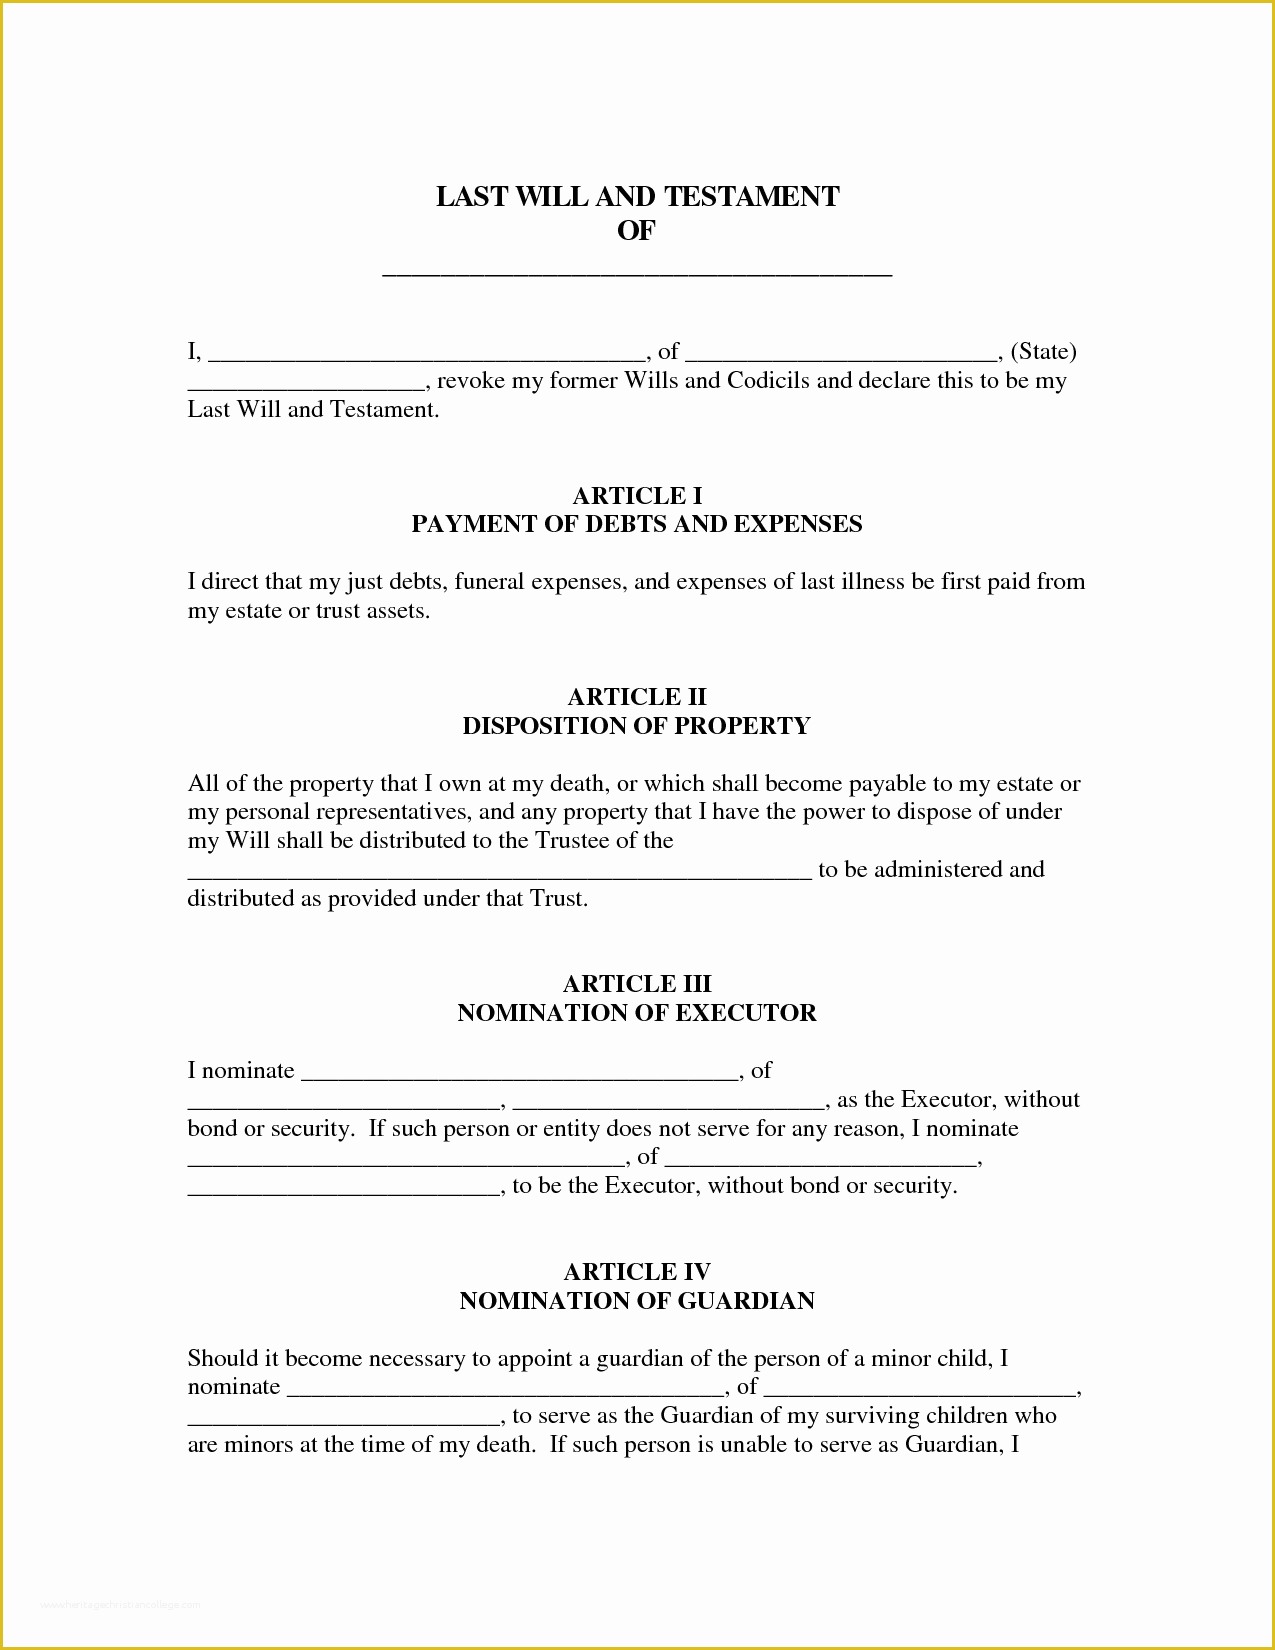 Last Will and Testament Free Template Of Last Will and Testament Template Free Printable Documents